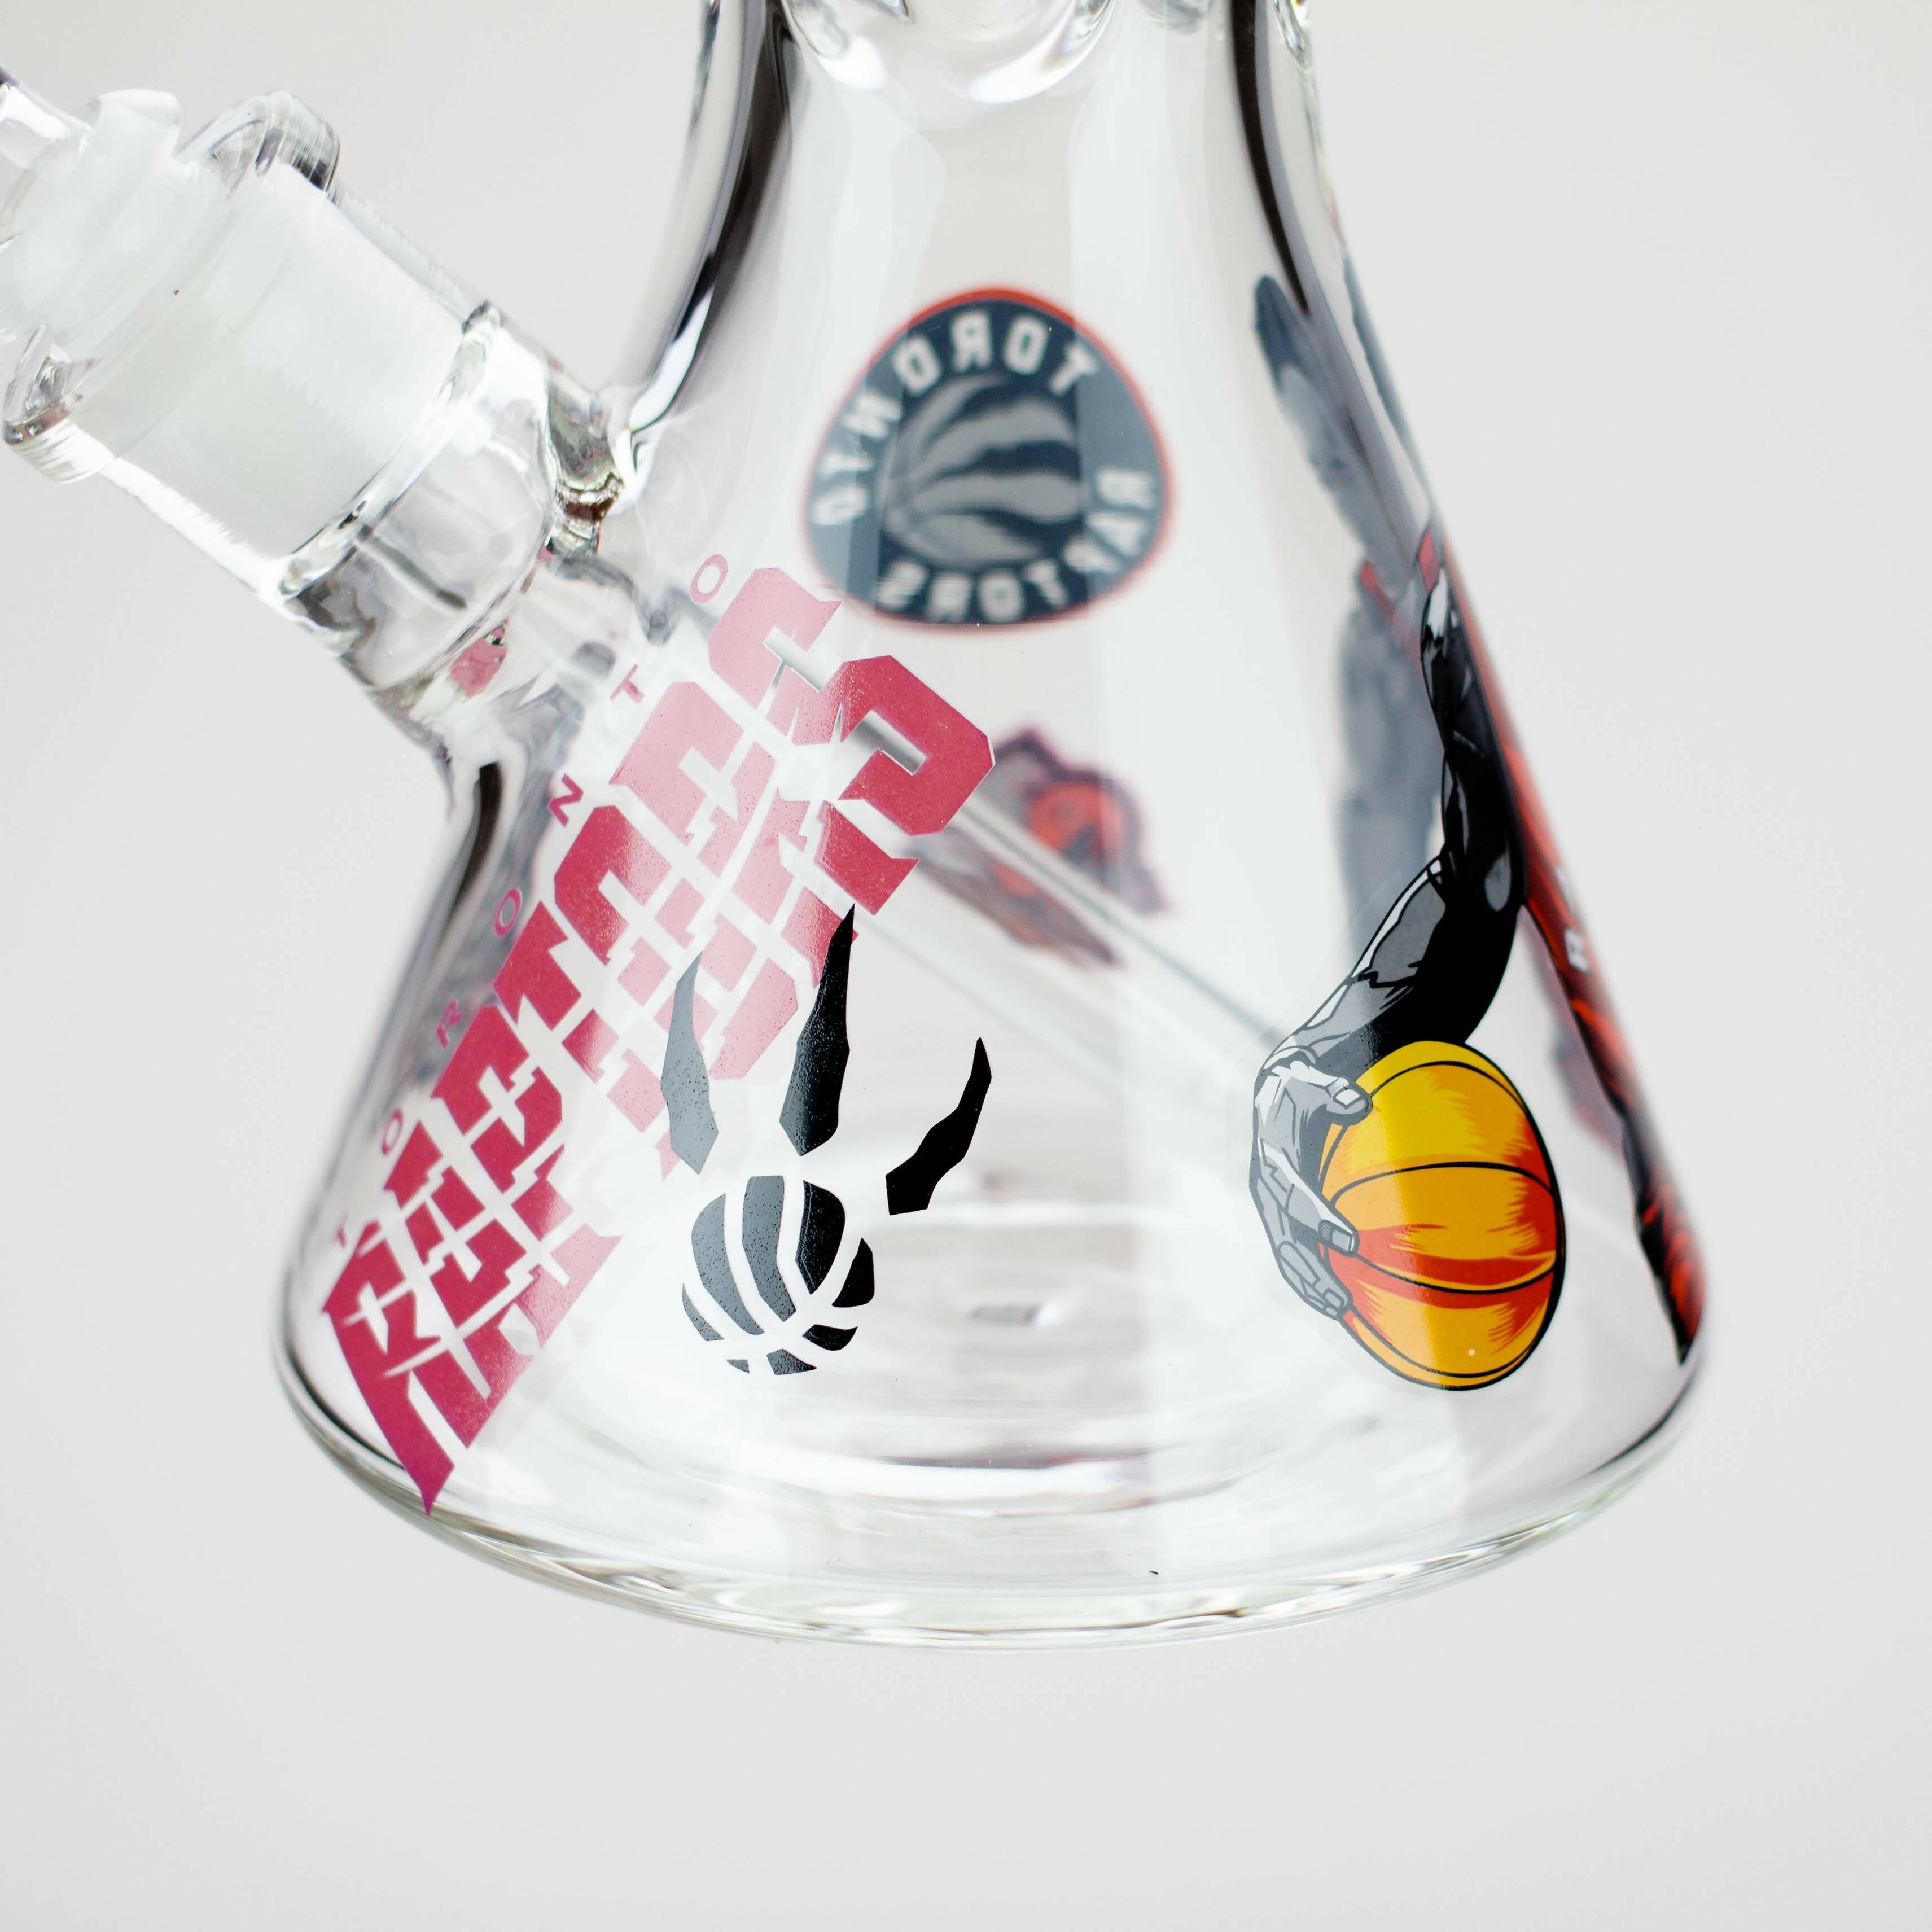 14" TO Champions 7mm glass water bong_3